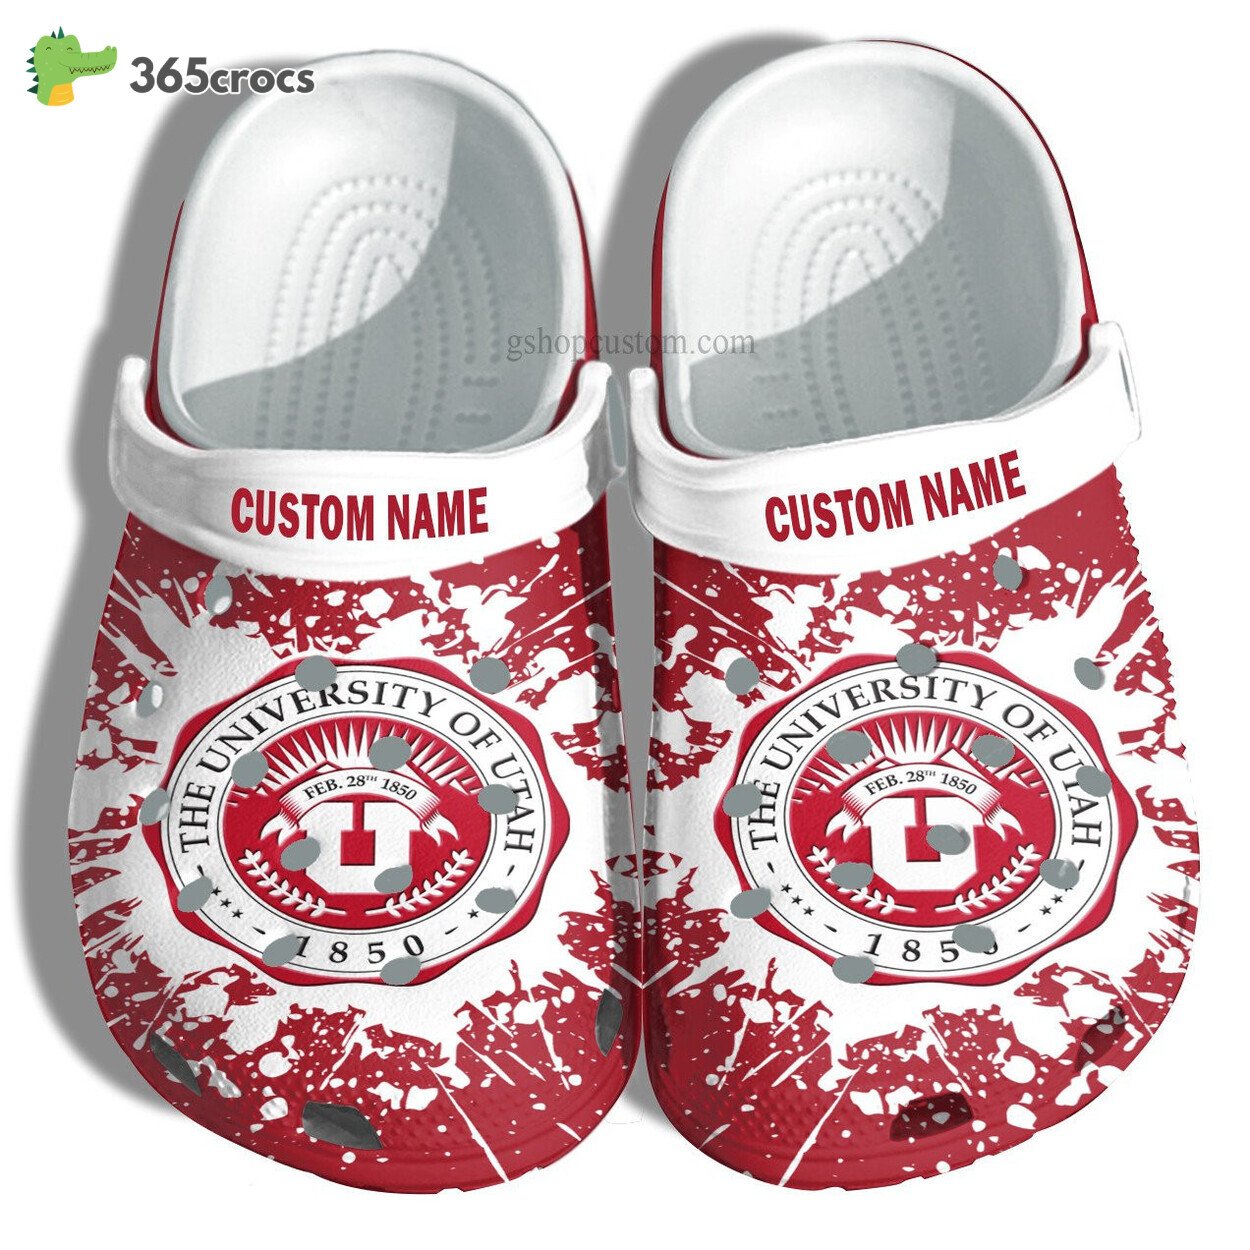 The University Of Utah Graduation Gifts Croc Shoes Customize Admission Gift Shoes